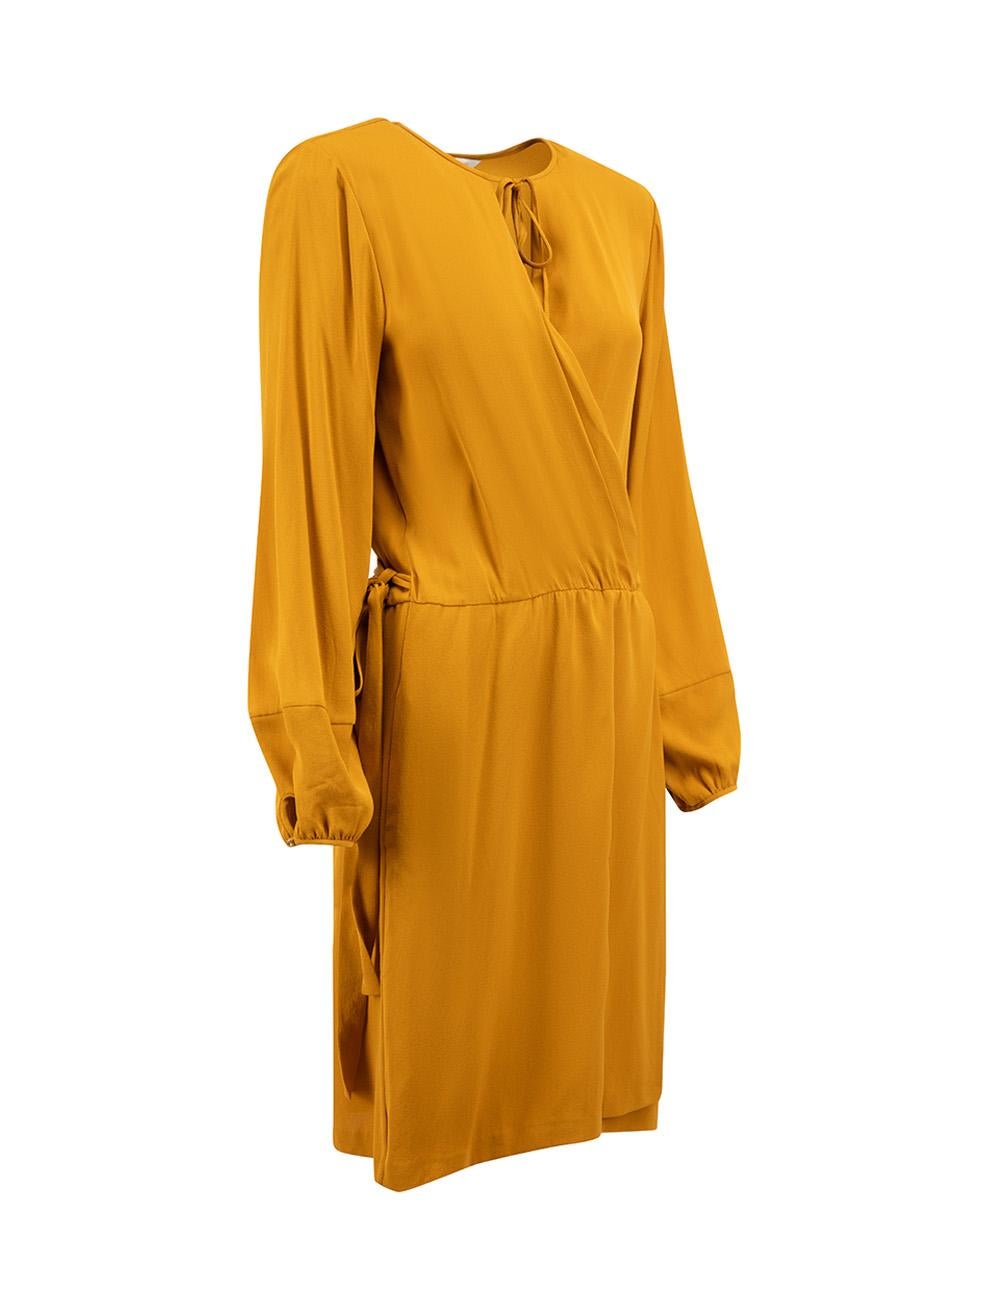 CONDITION is Good. Minor wear to dress is evident. Light wear to the front with dark marks and a pull to the weave at the rear on this used Diane Von Furstenberg designer resale item.



Details


Camel

Silk

Wrap dress

Midi

Long sleeve

Round